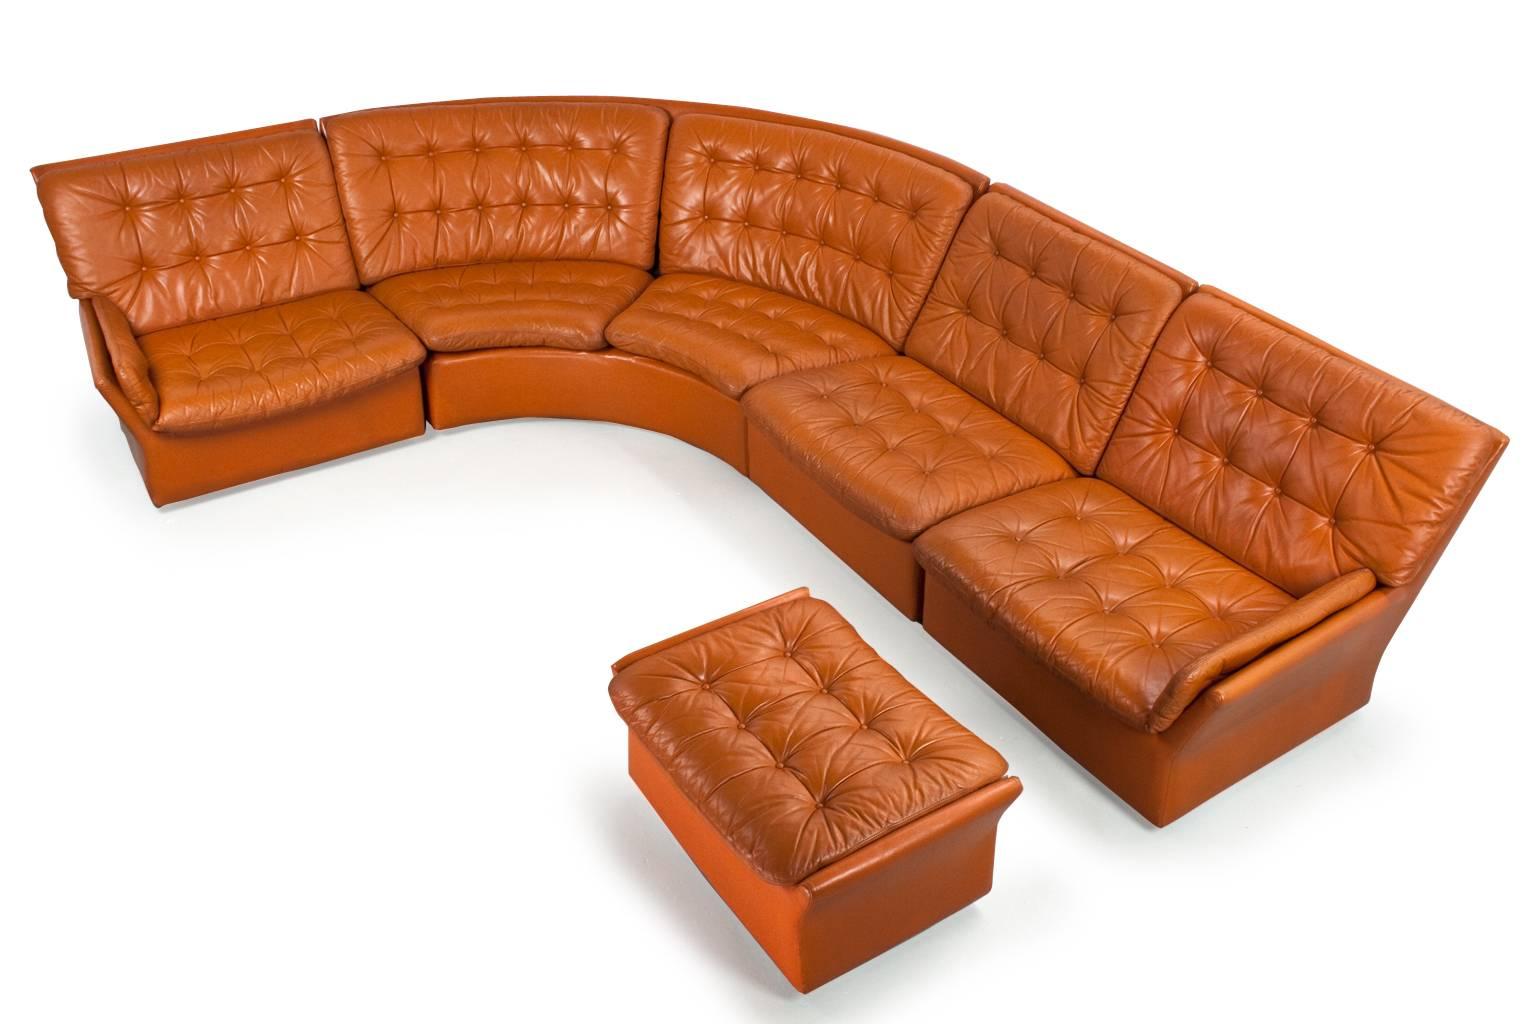 Mid-Century Modern four-sectional corner / round sofa in cognac, brown colored leather, padded upholstery and additional hocker (on wheels). The item is in original and good condition, patina on the leather conform age. Lounge and comfortable